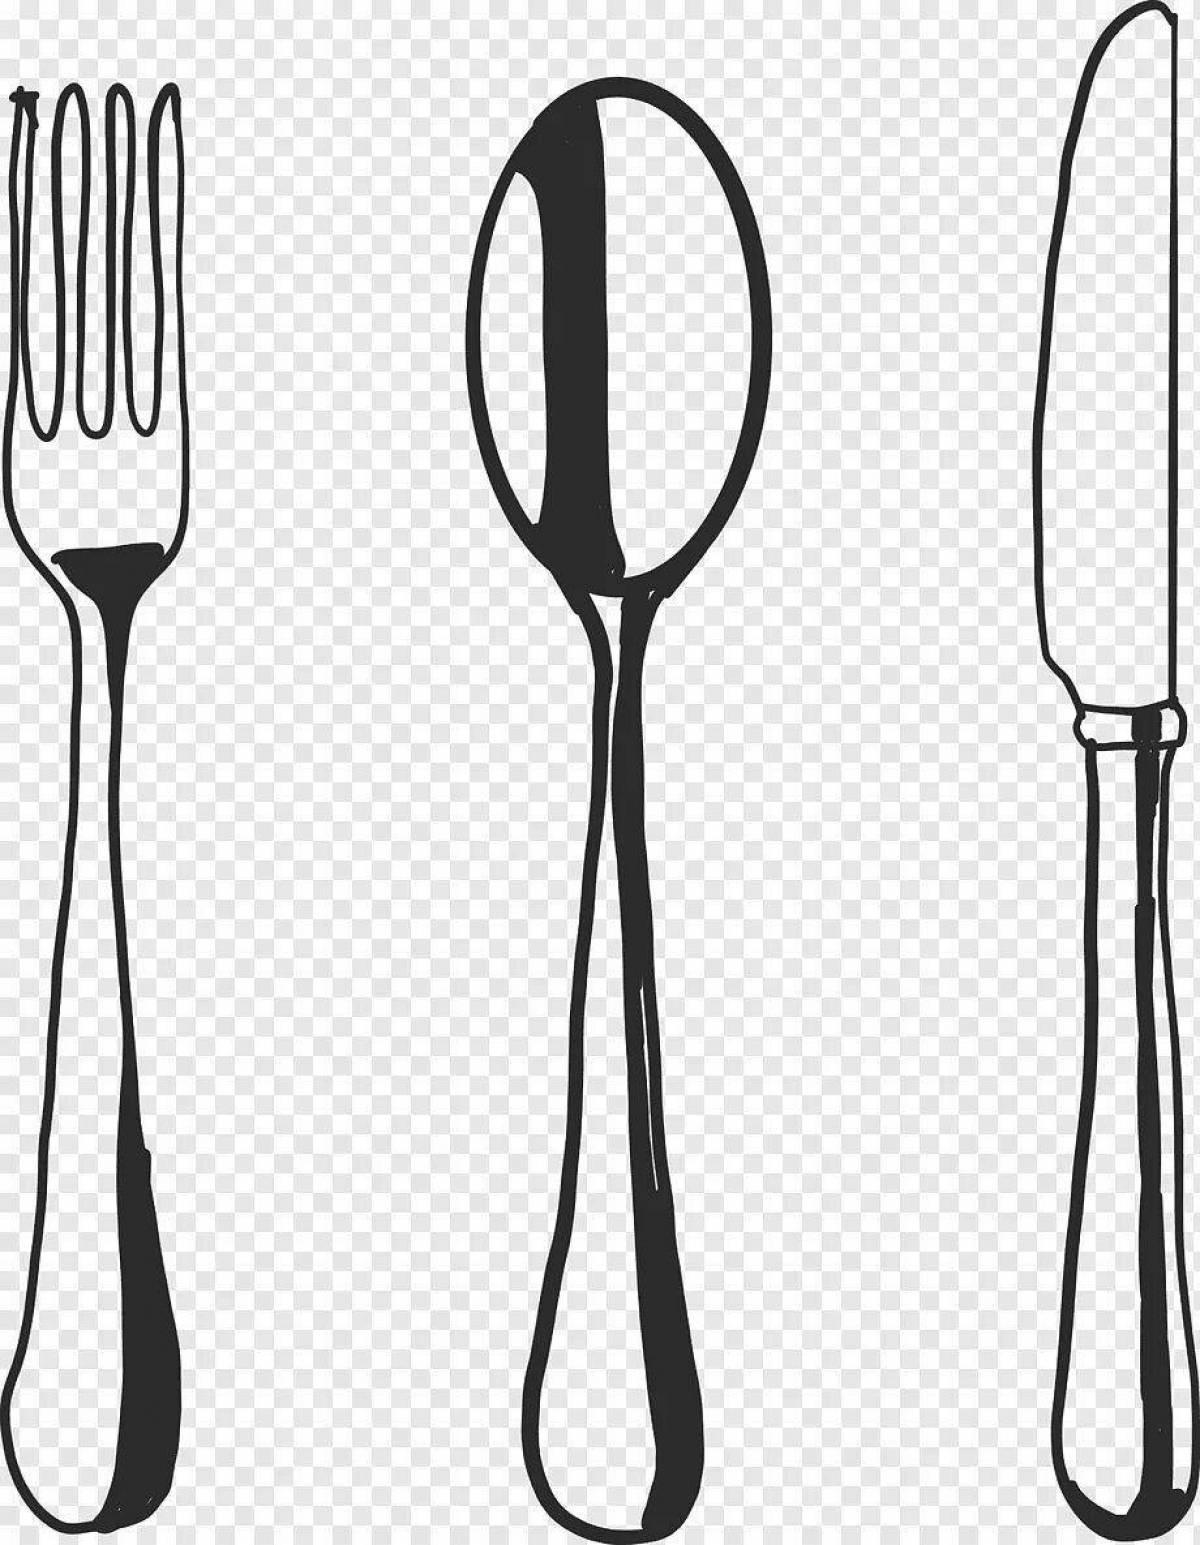 Exquisite fork and knife coloring book